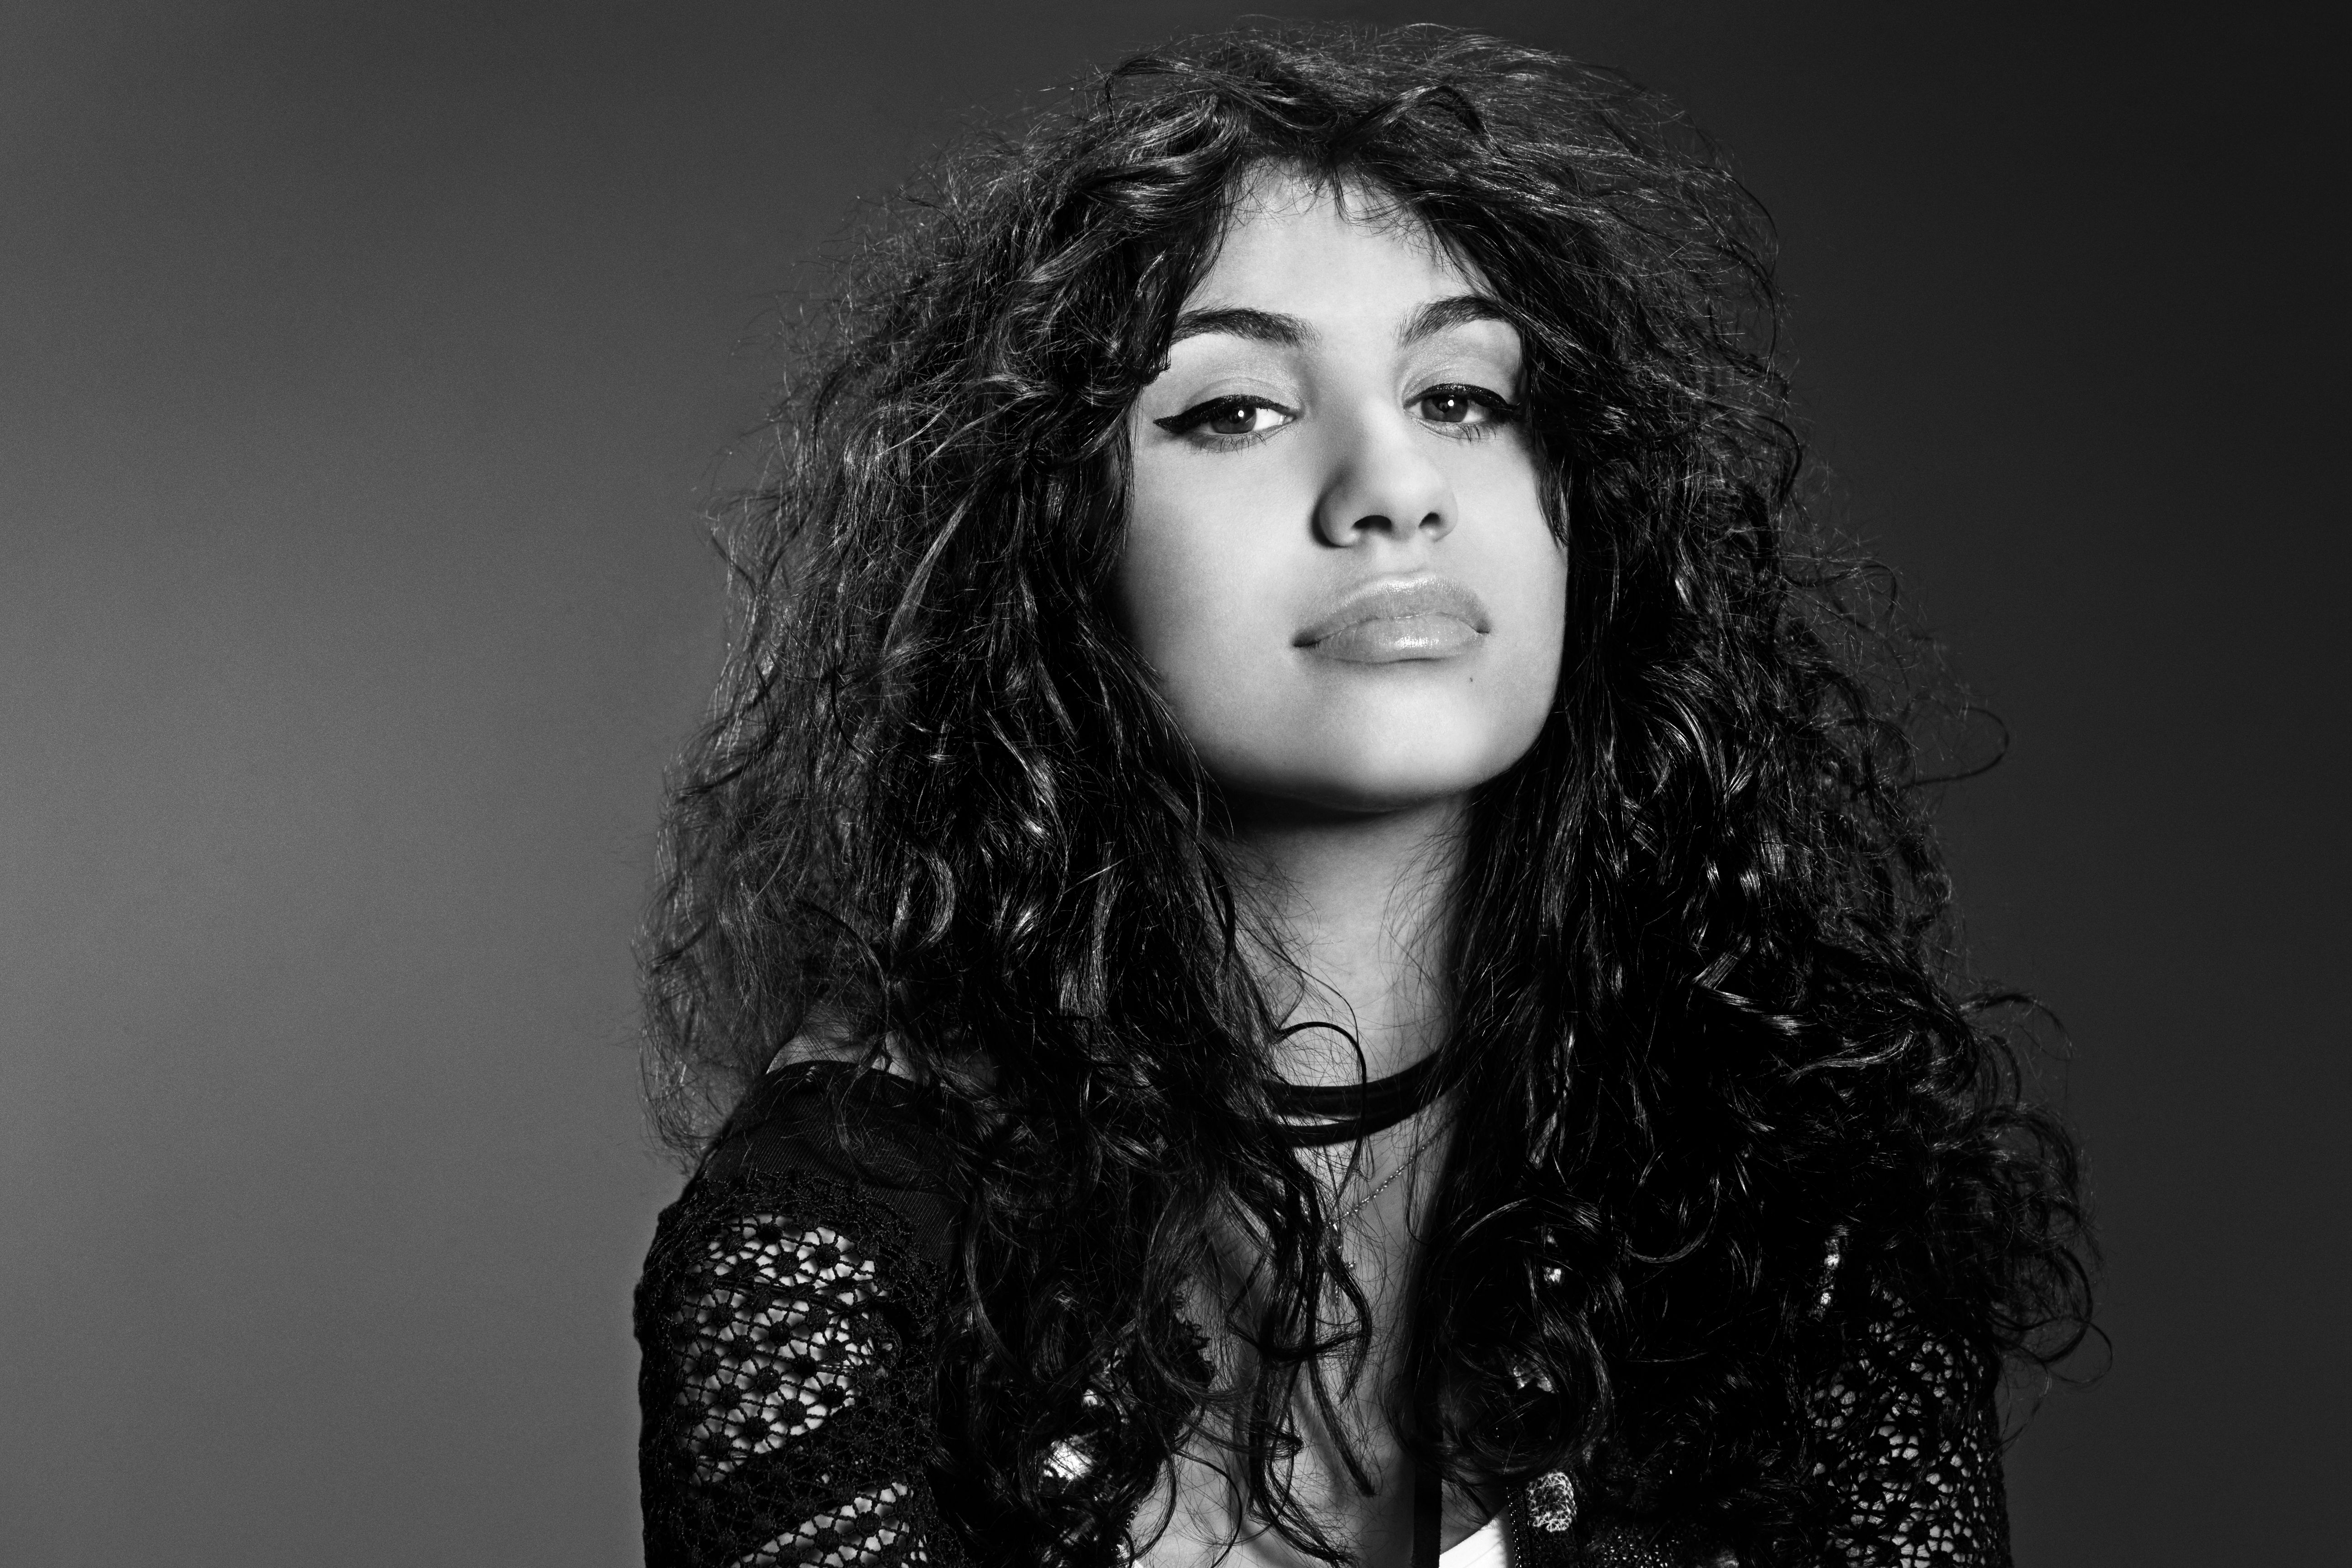 HD wallpaper, Alessia Cara, 5K, Black And White, Monochrome, Canadian Singer